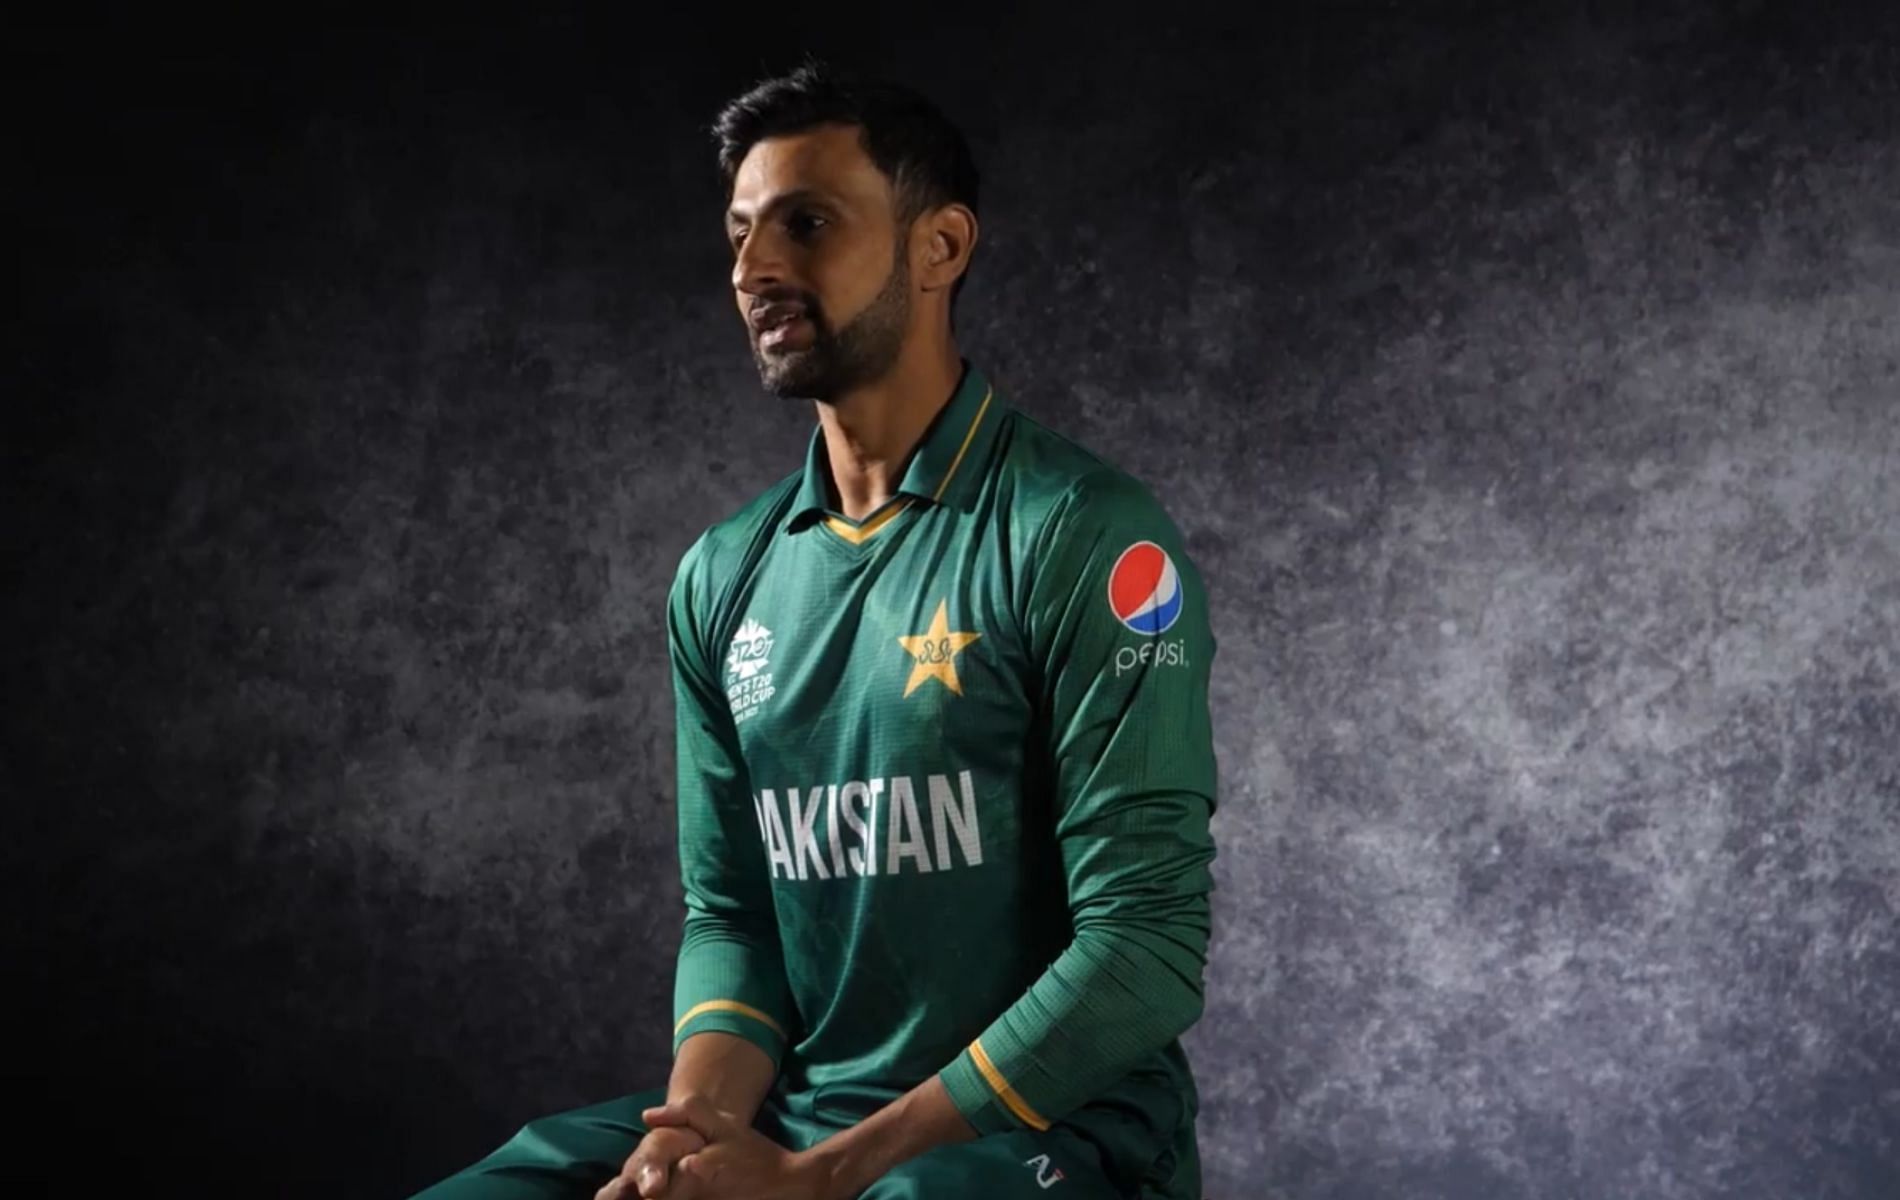 Shoaib Malik said he would want to win the T20 World Cup one more time before retirement.